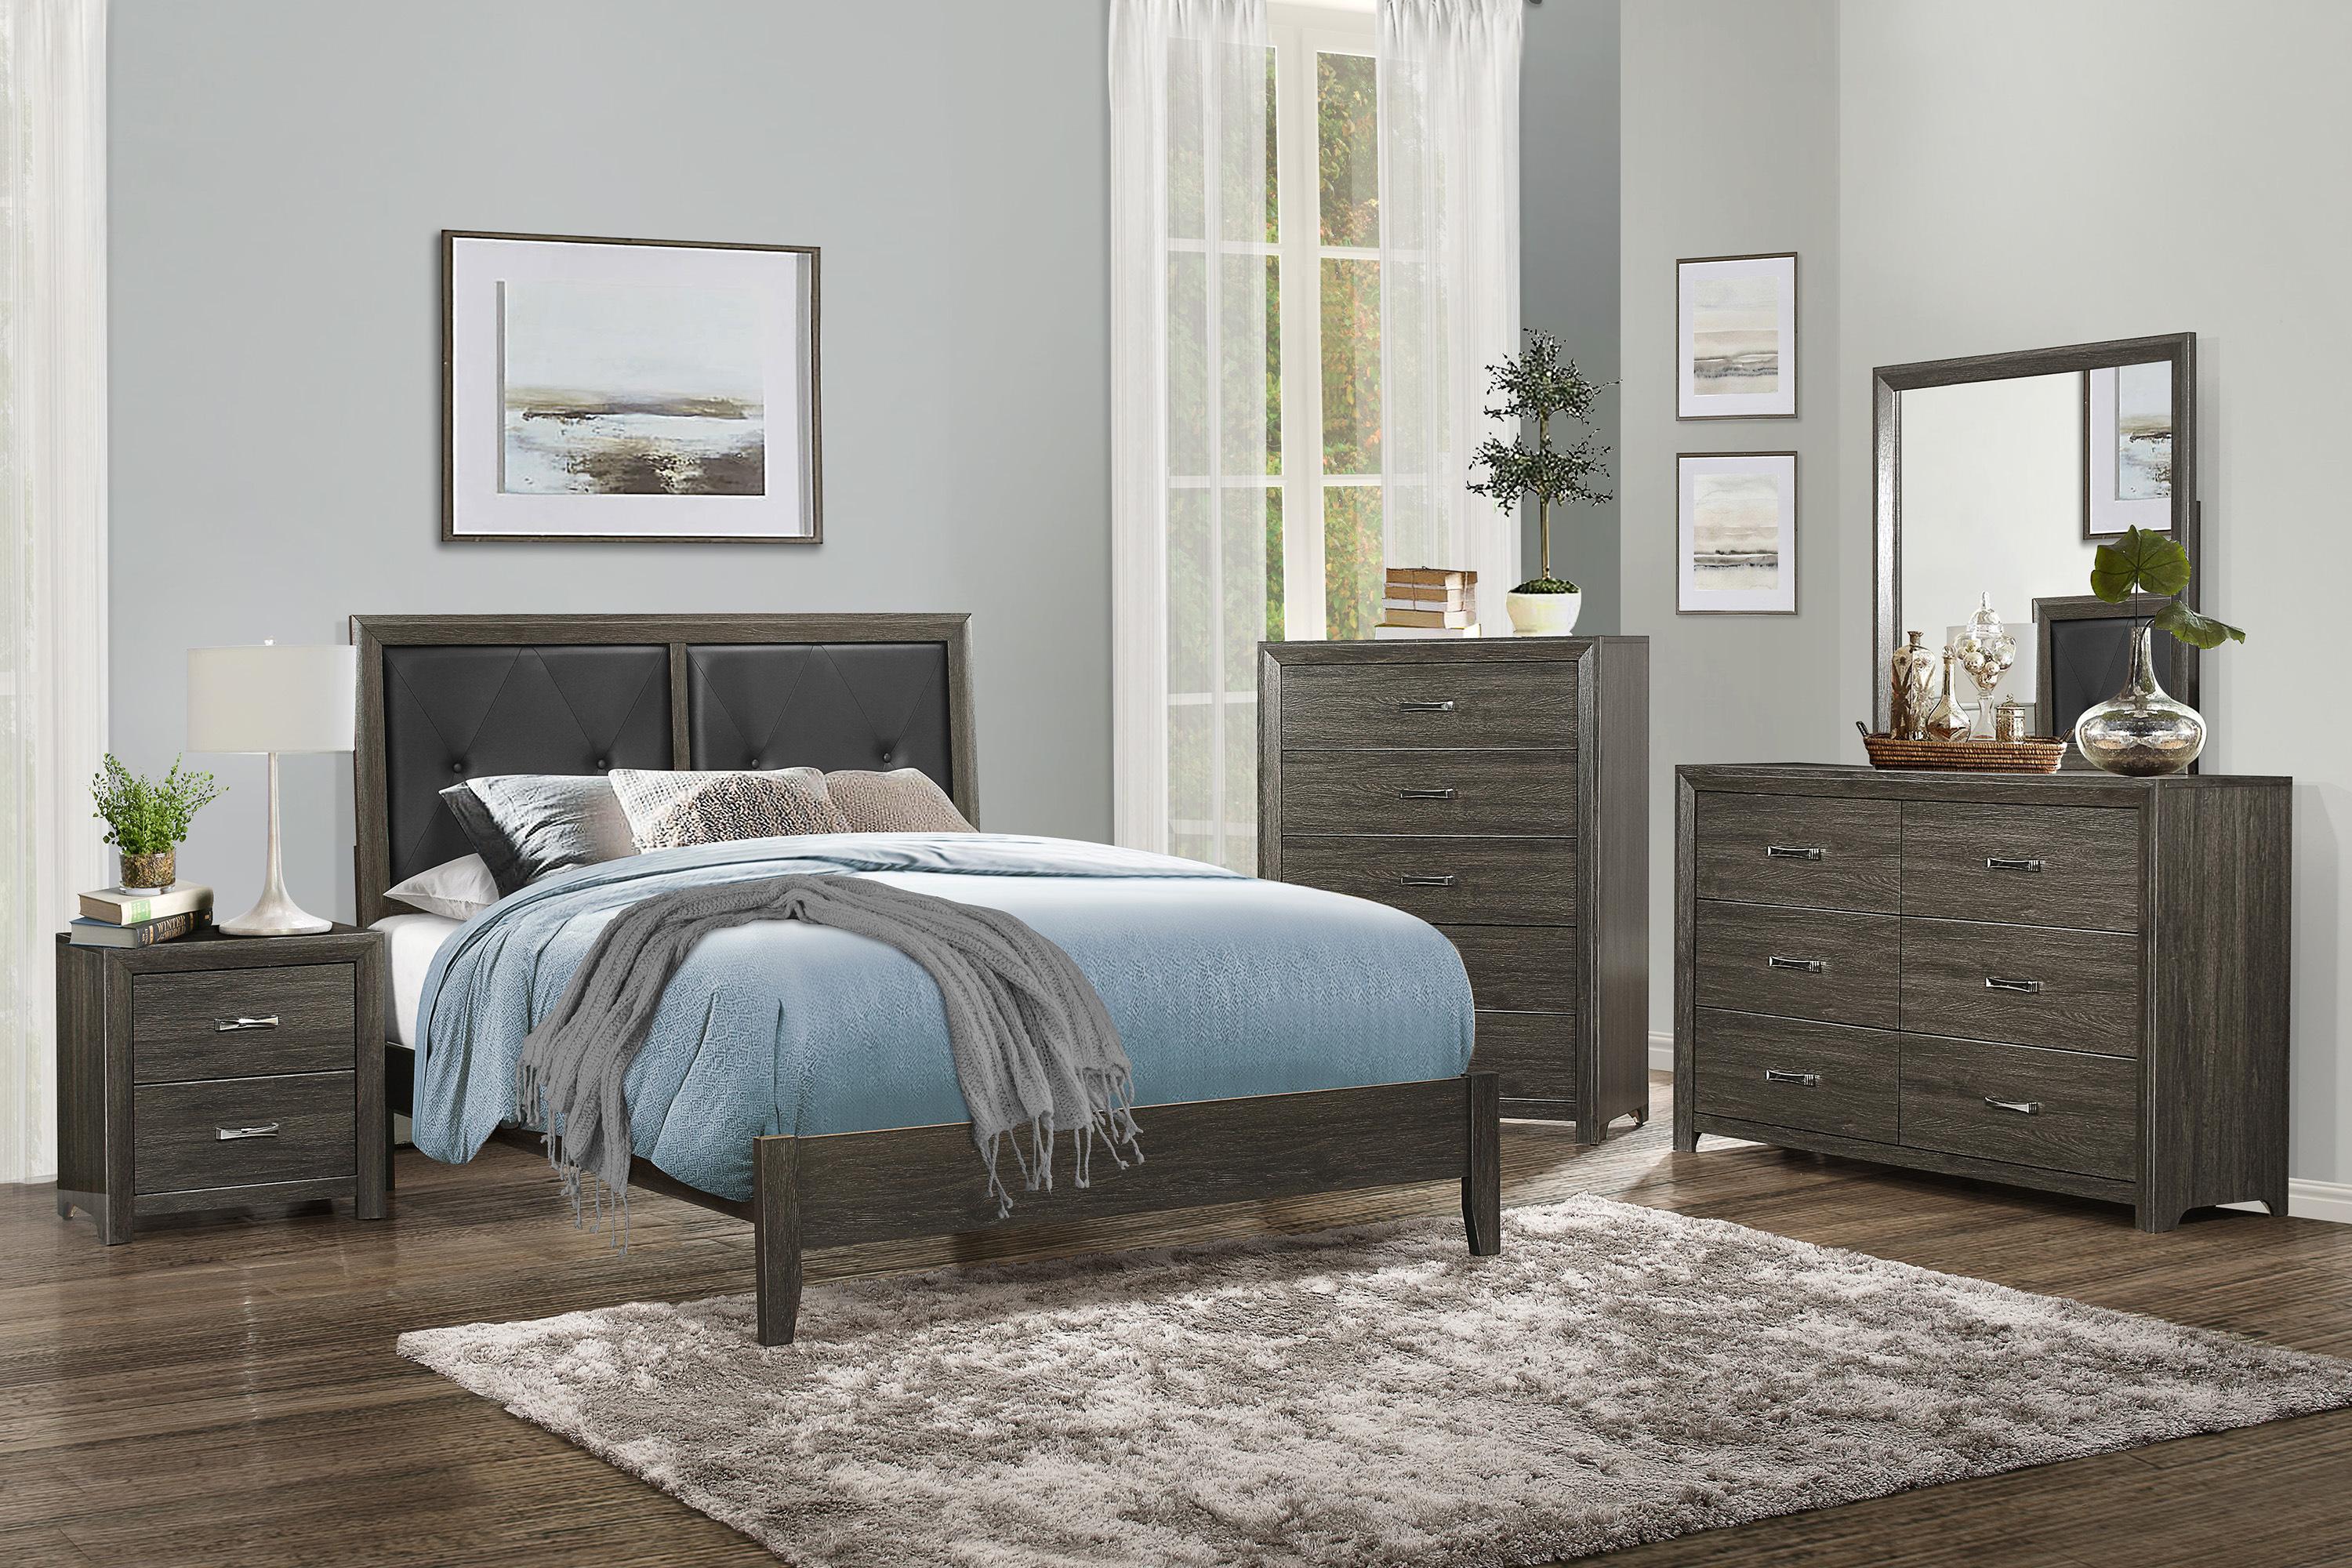 Contemporary Bedroom Set 2145FNP-1-6PC Edina 2145FNP-1-6PC in Dark Gray Faux Leather